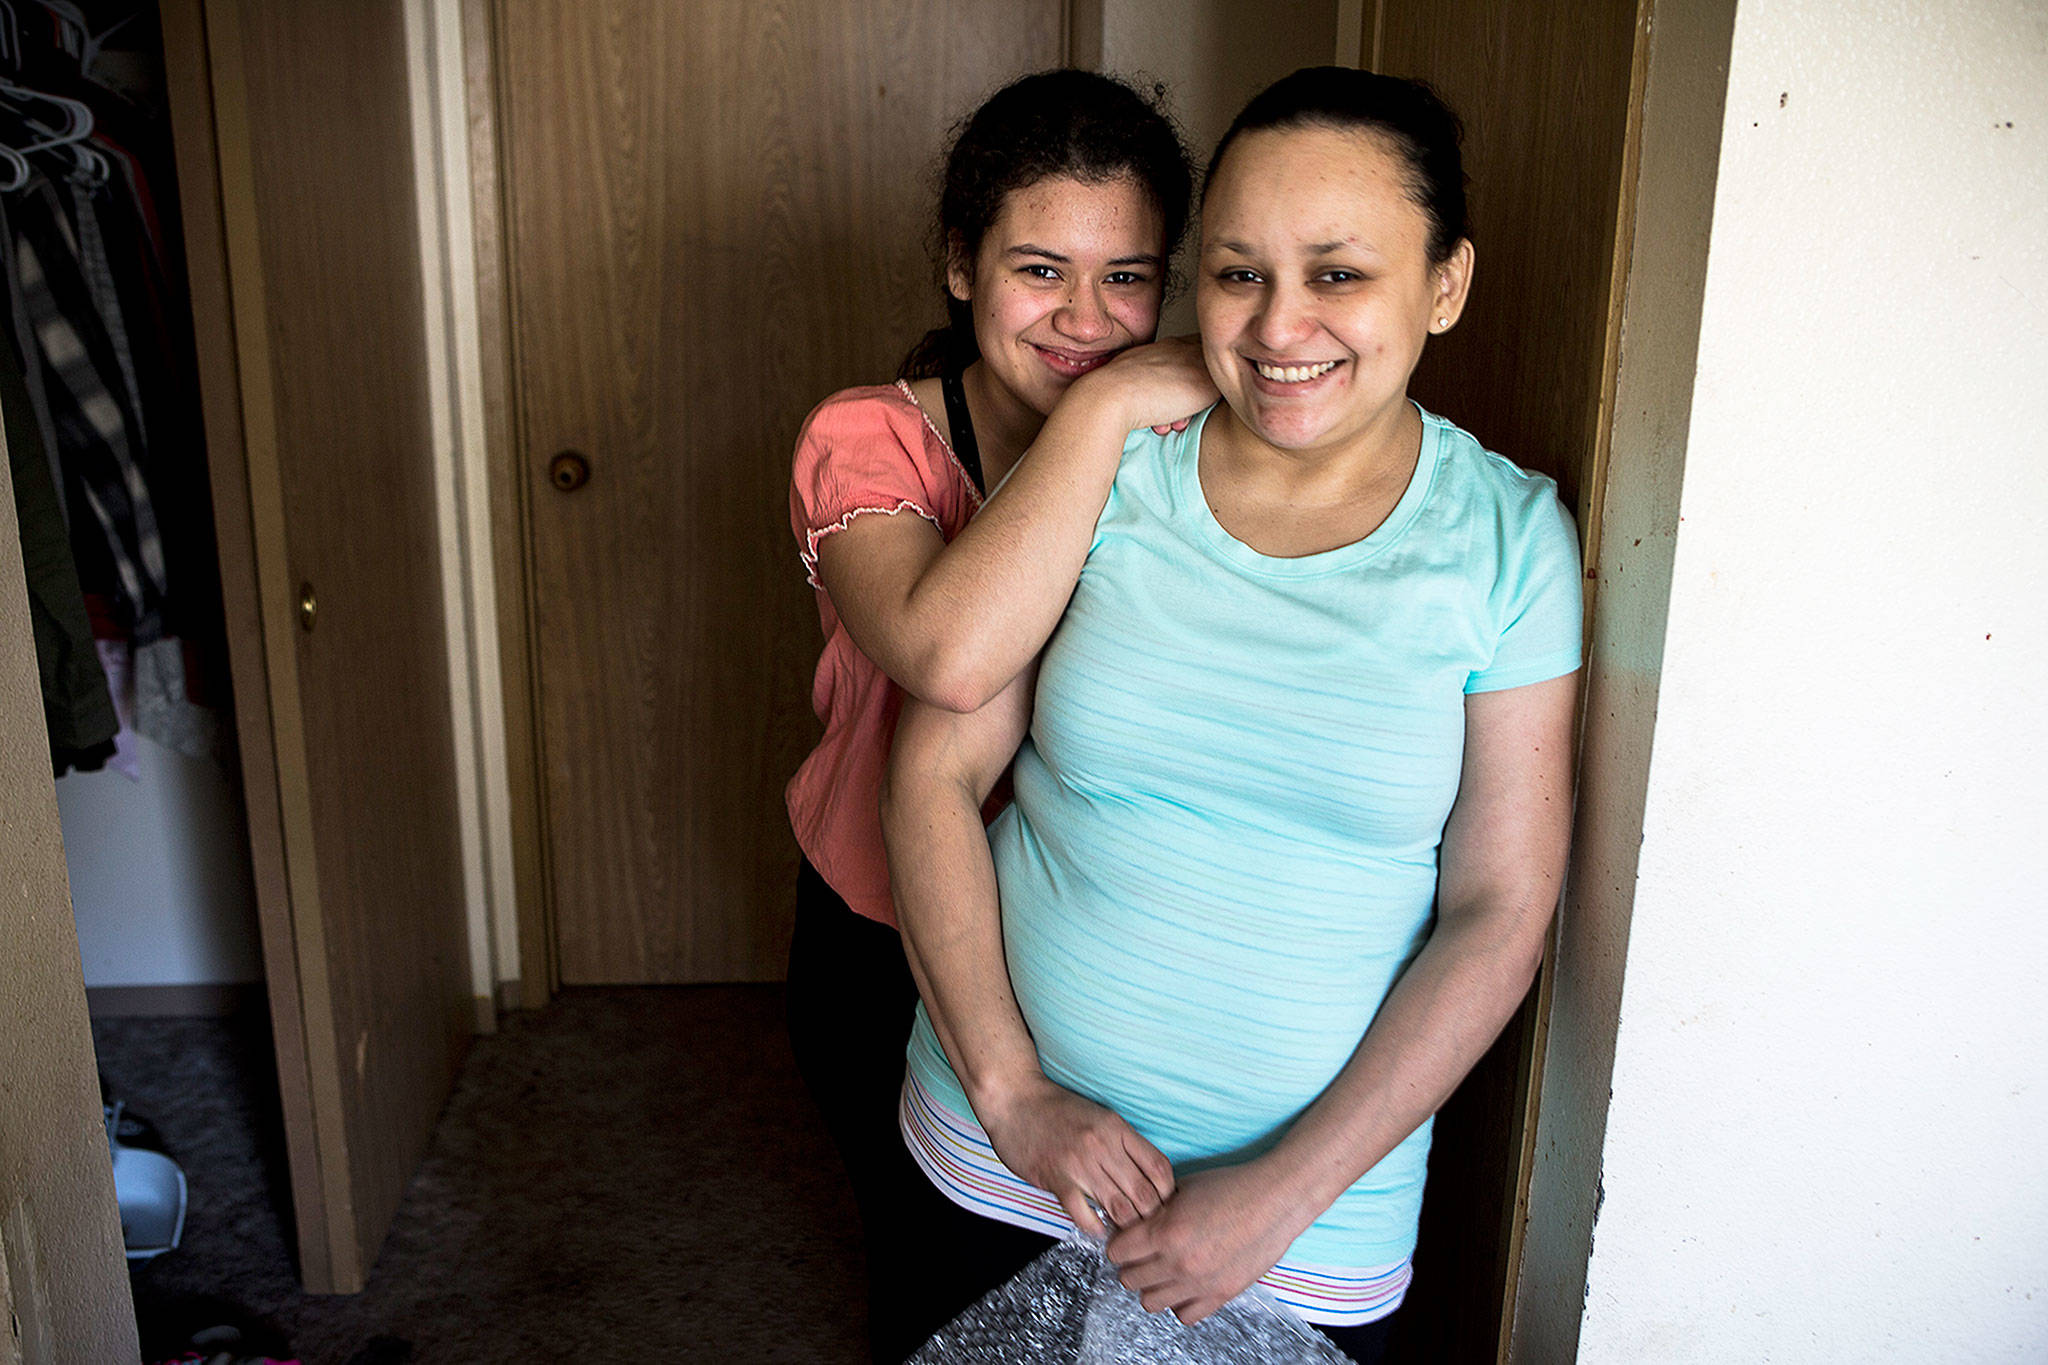 Bernarda Pineda brought her oldest daughter, Sherly Alvarado-Pineda, 14, to the U.S. 12 years ago. Through an online fundraising campaign, Pineda was able to hire an immigration attorney to fight her deportation and the separation of her from her girls. (Ian Terry / Herald file)